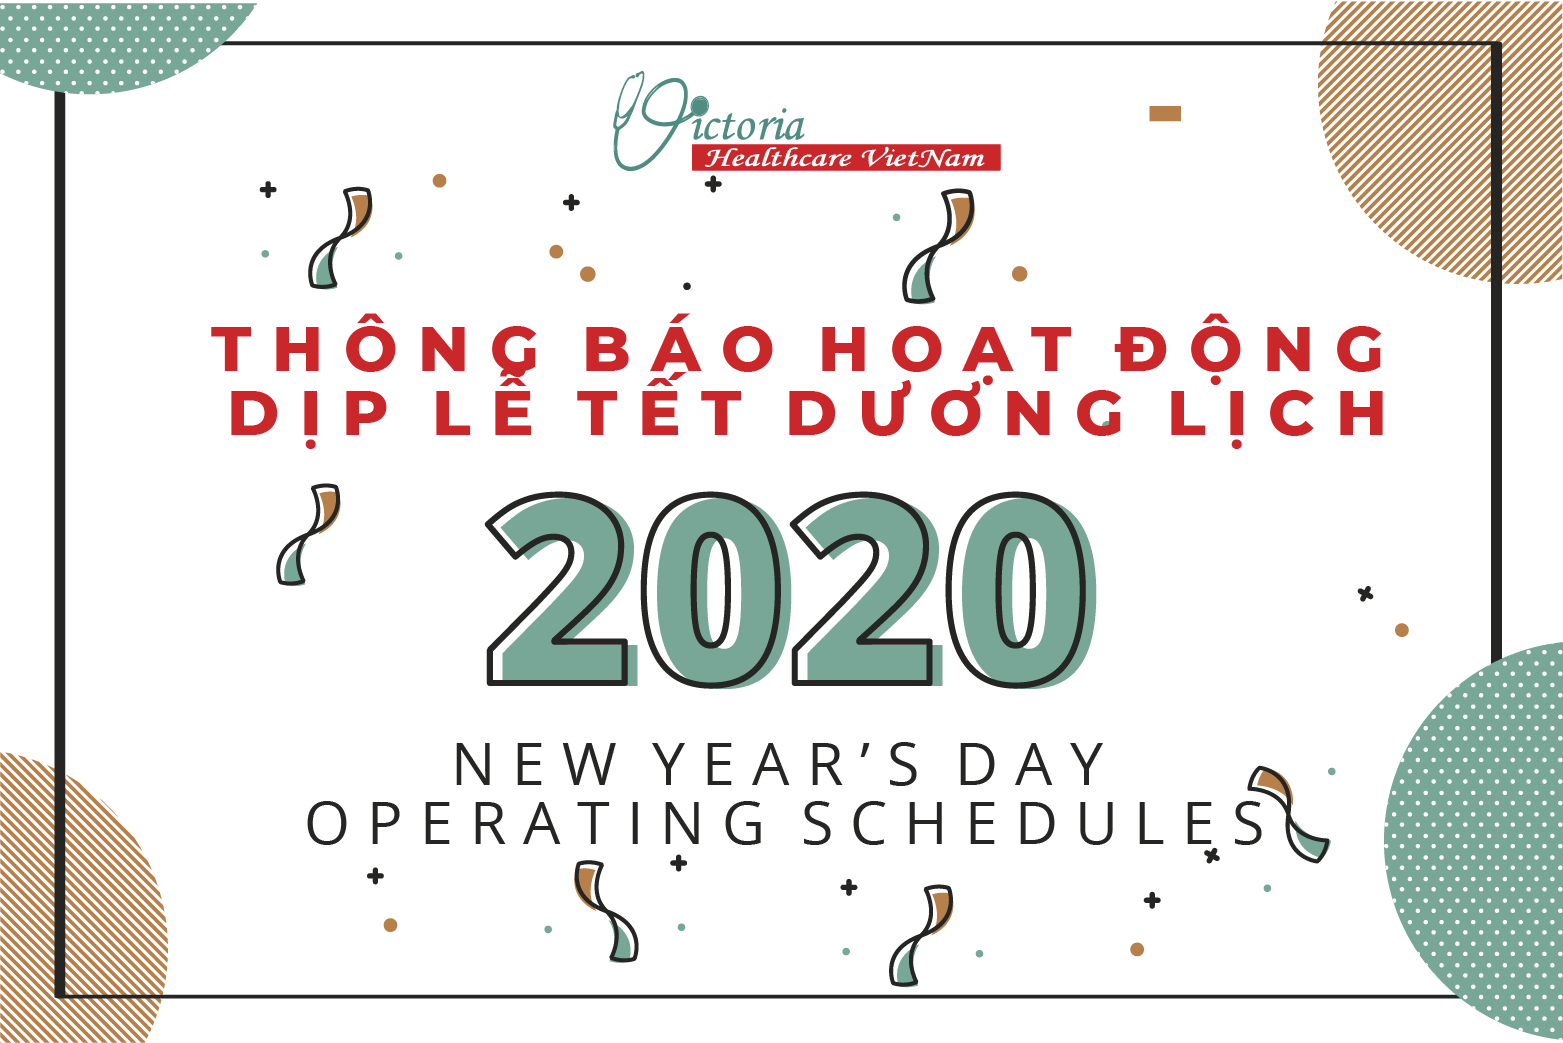 NEW YEAR’S DAY 2020 OPERATING SCHEDULES 